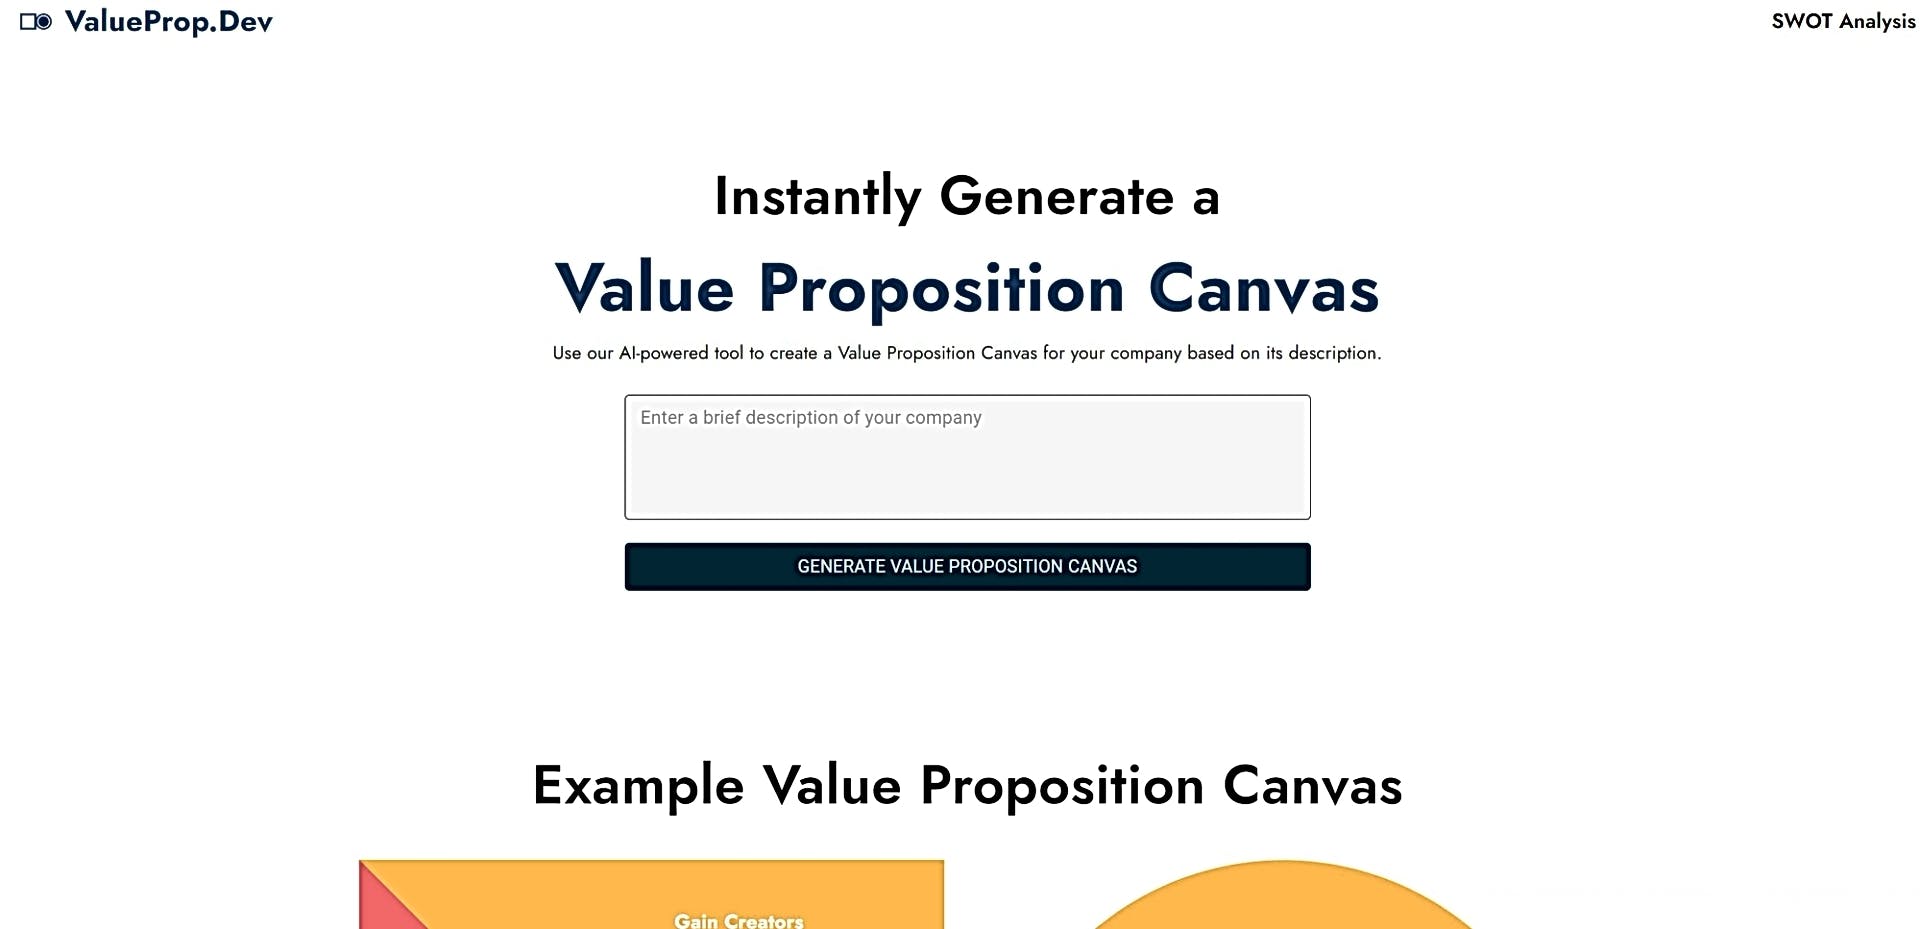 Value Prop Canvas featured